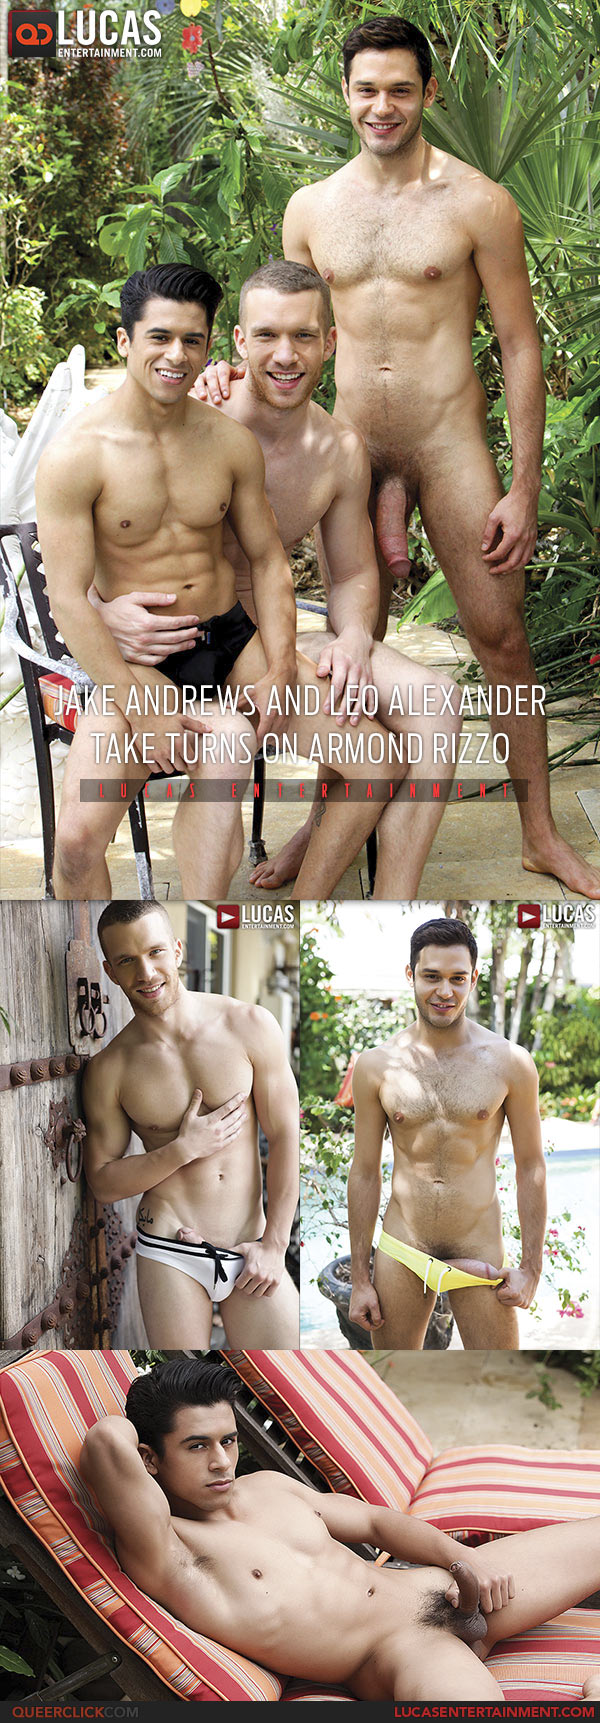 Lucas Entertainment: Jake Andrews And Leo Alexander Take Turns On Armond Rizzo